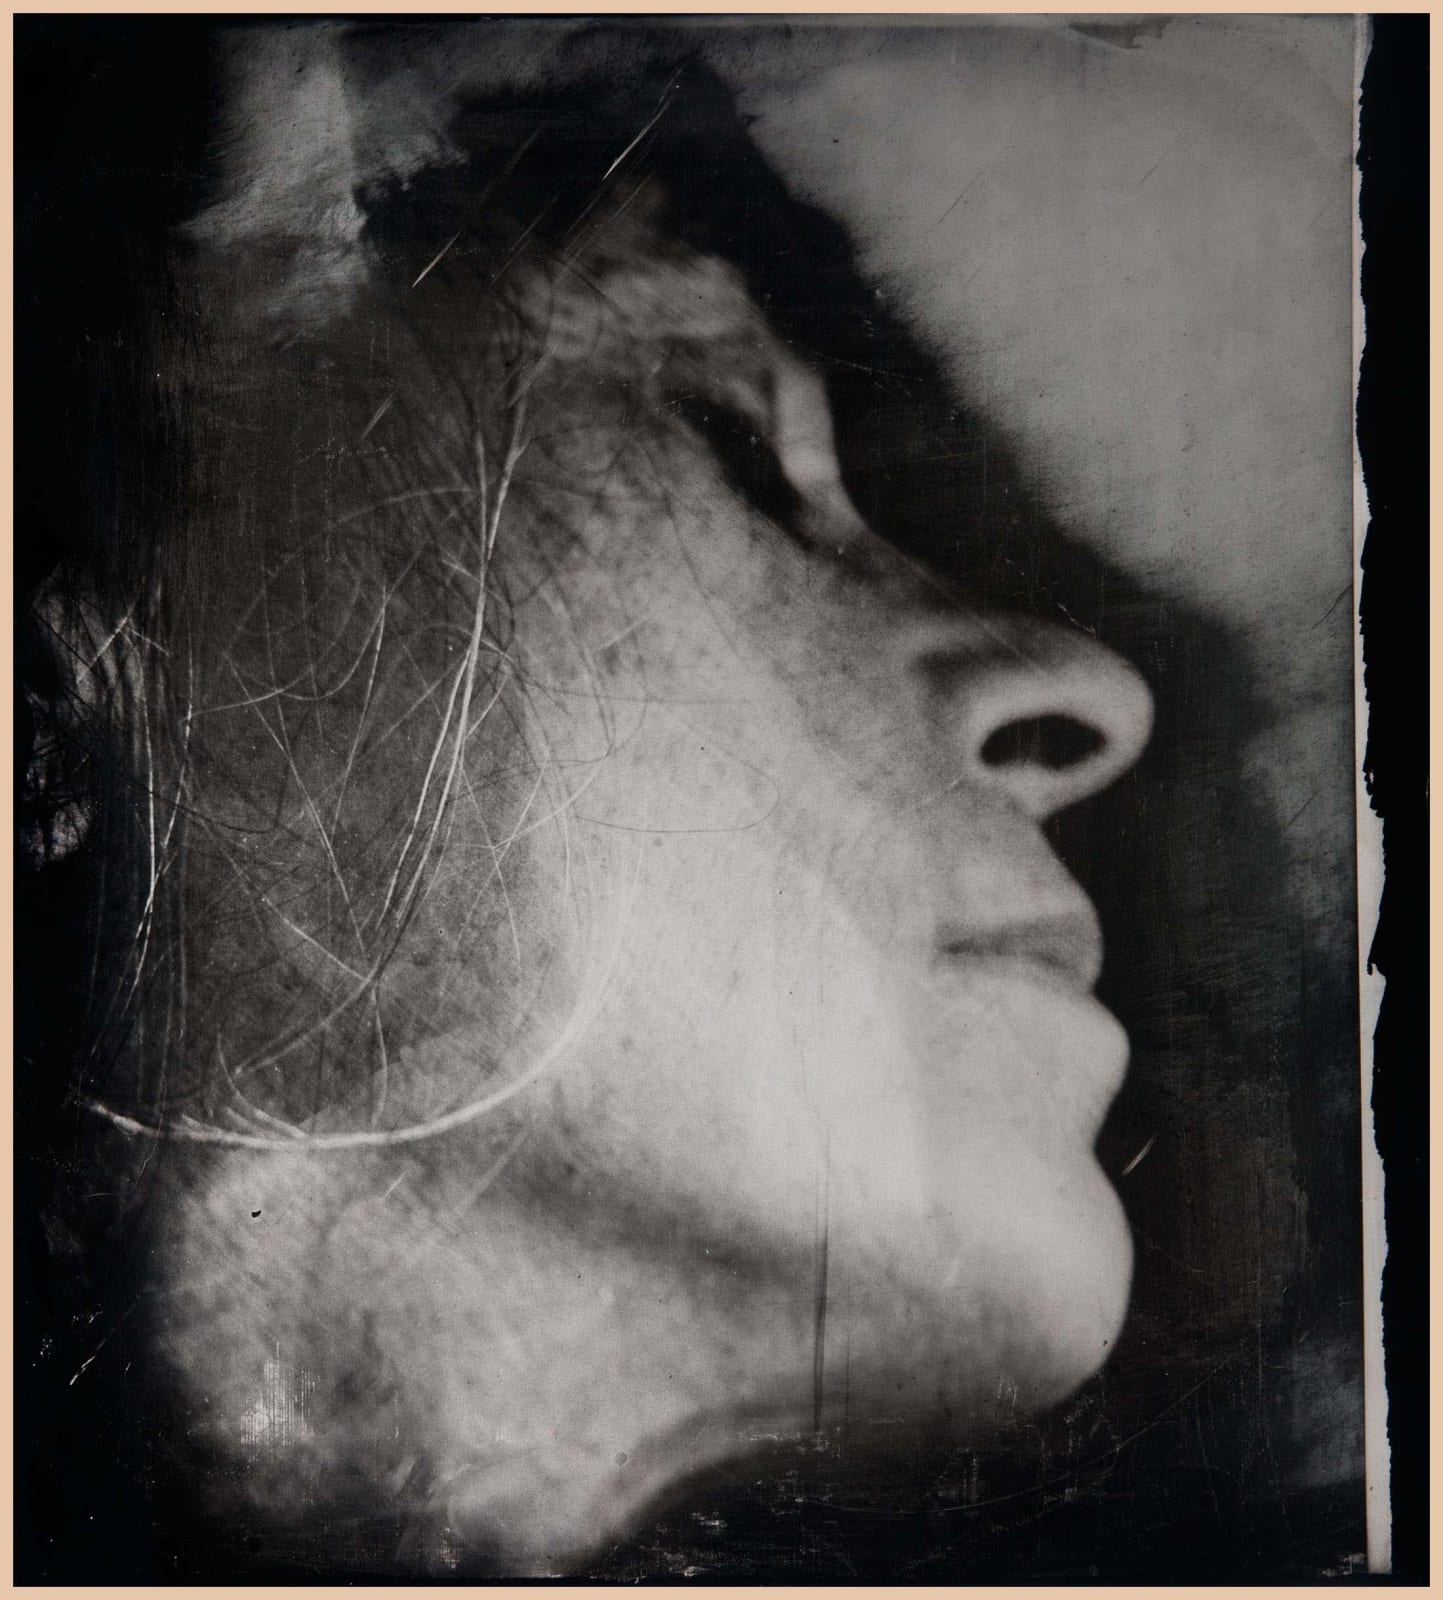 Sally Mann ambrotype self-portrait from the Upon Reflection series